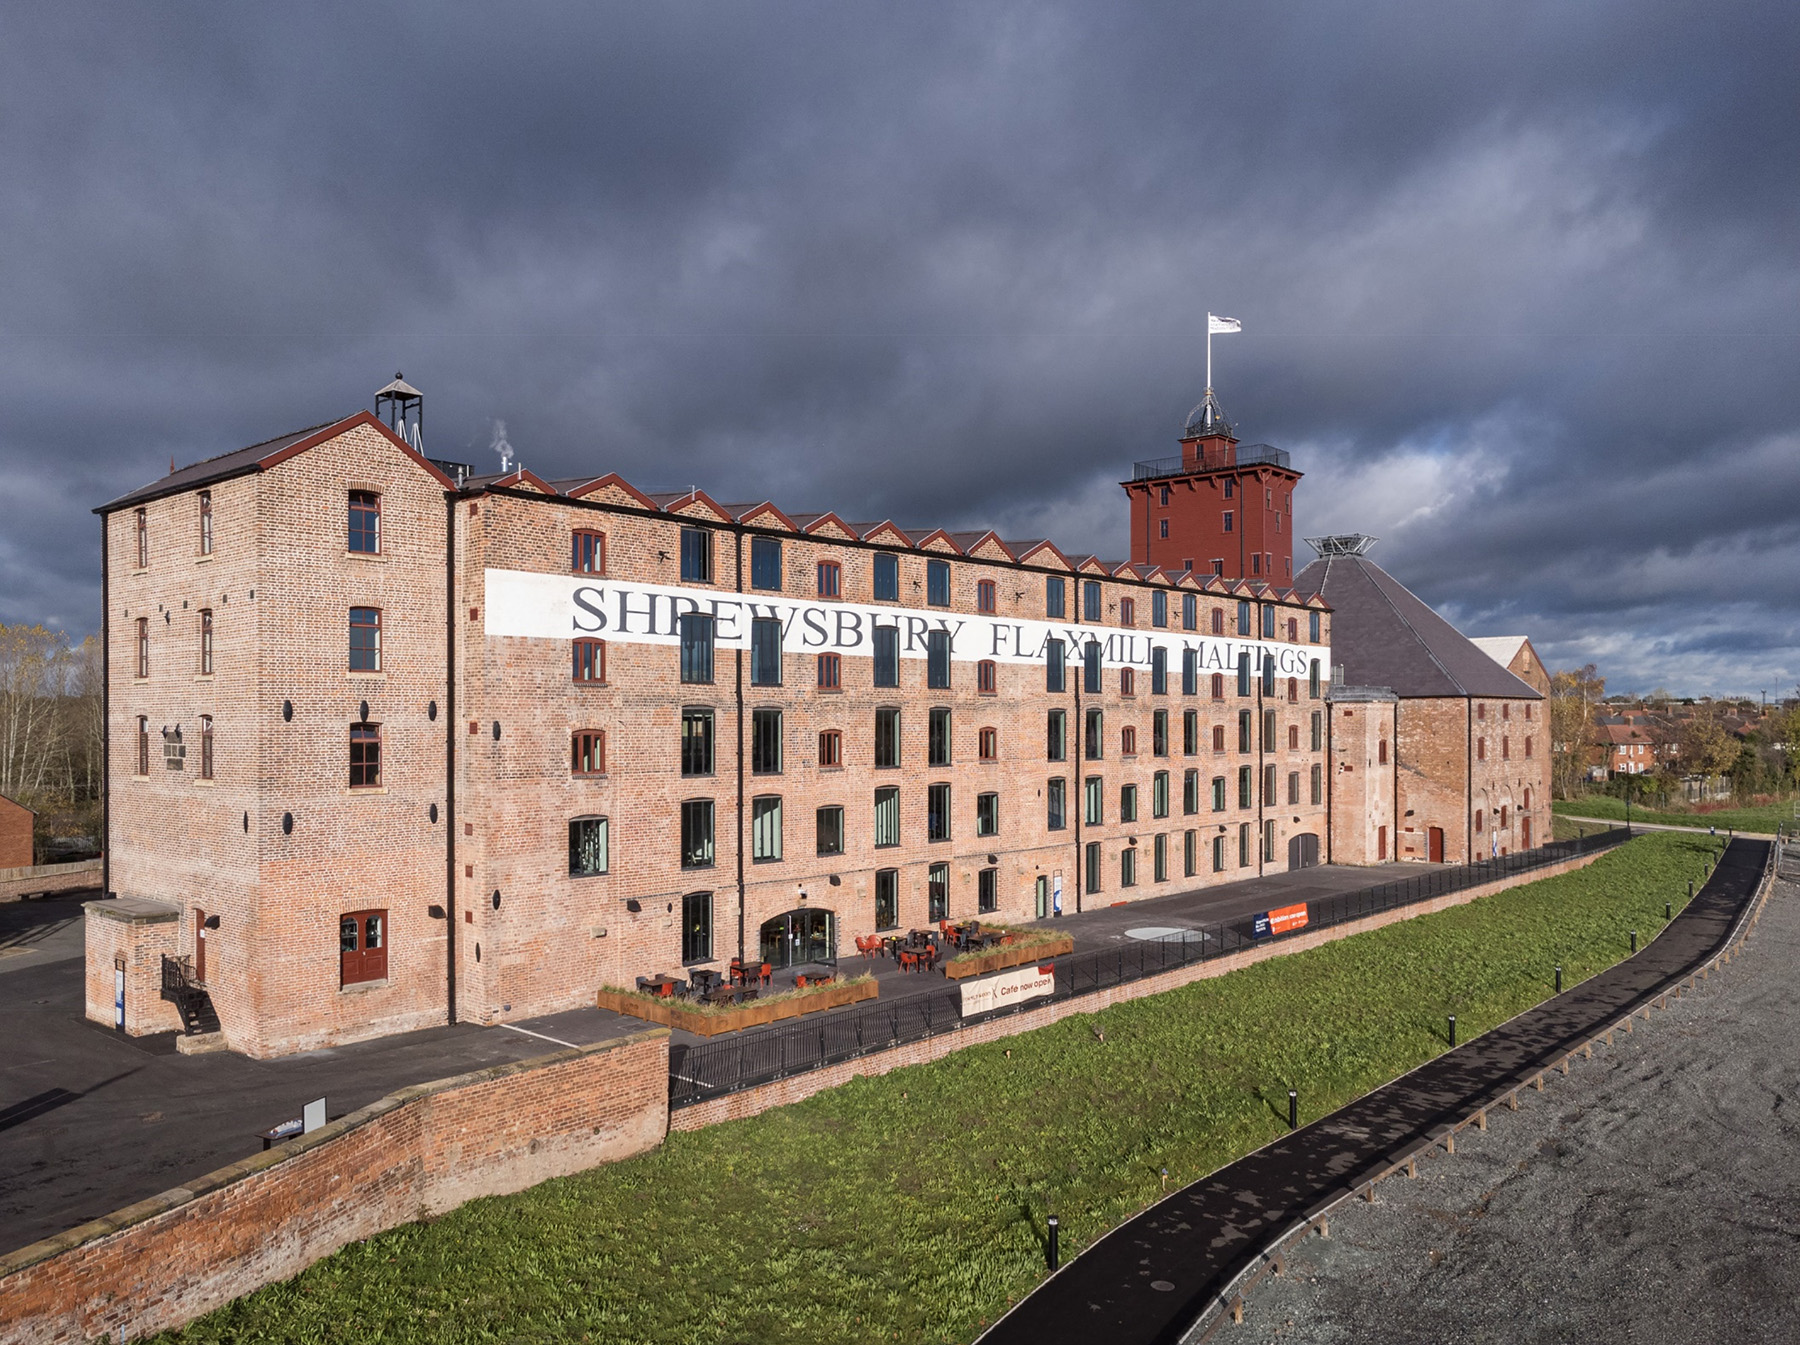 Multistory brick building with the words “Shrewsbury Flaxmill Maltings” written on the side. 